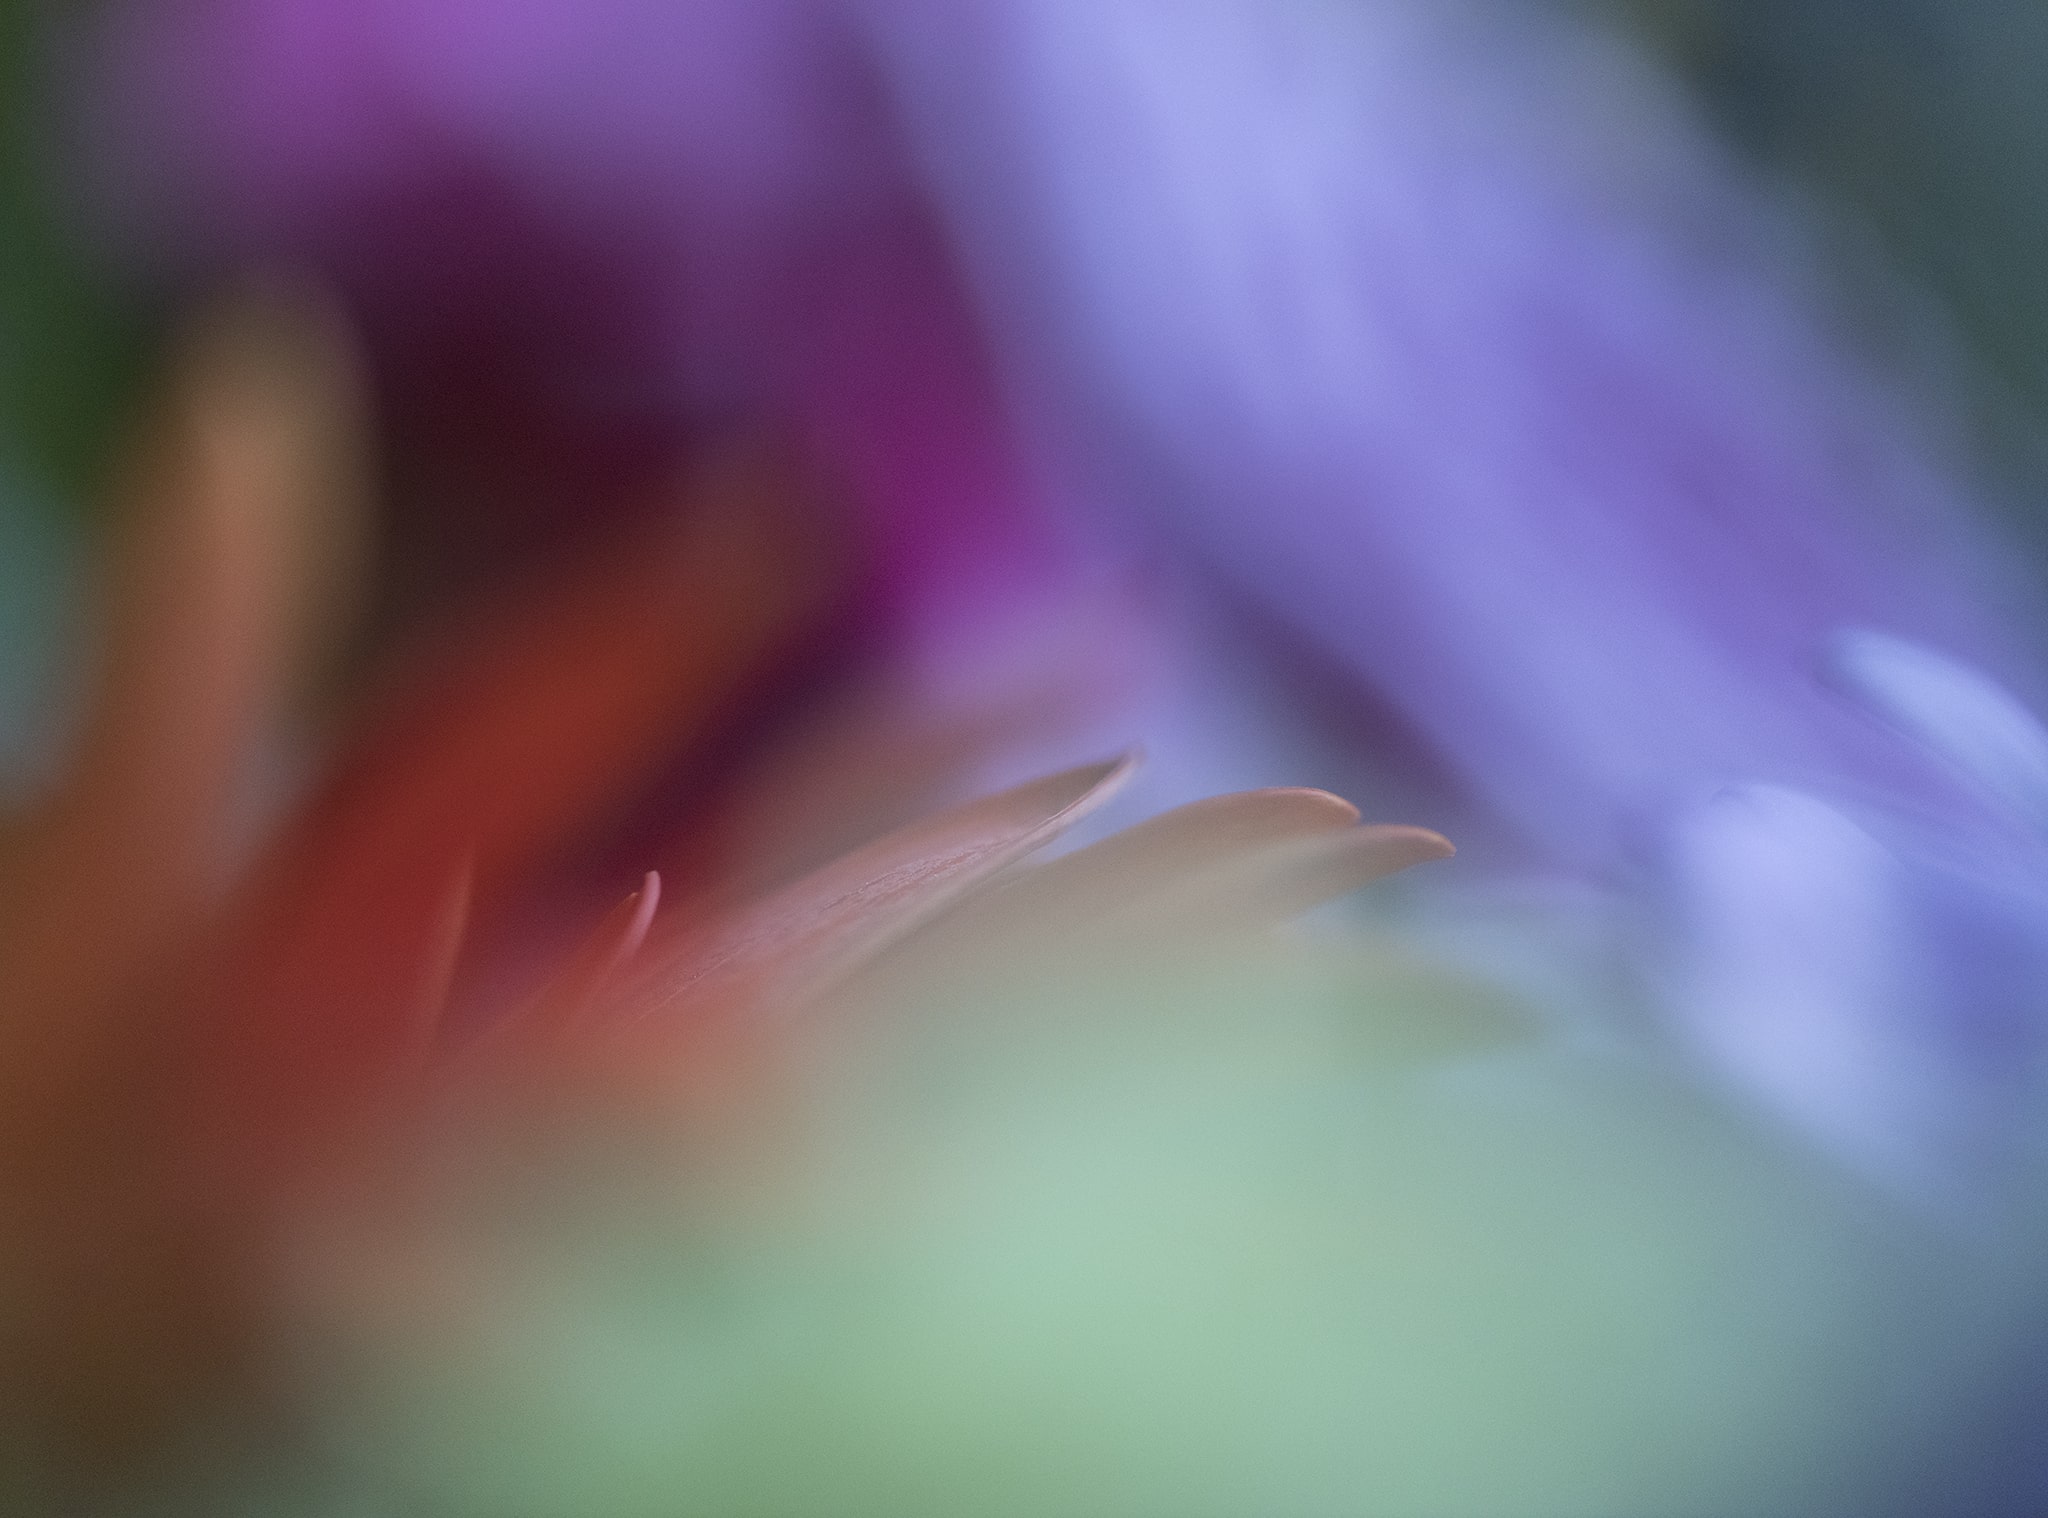 Colorful Abstract Flowers